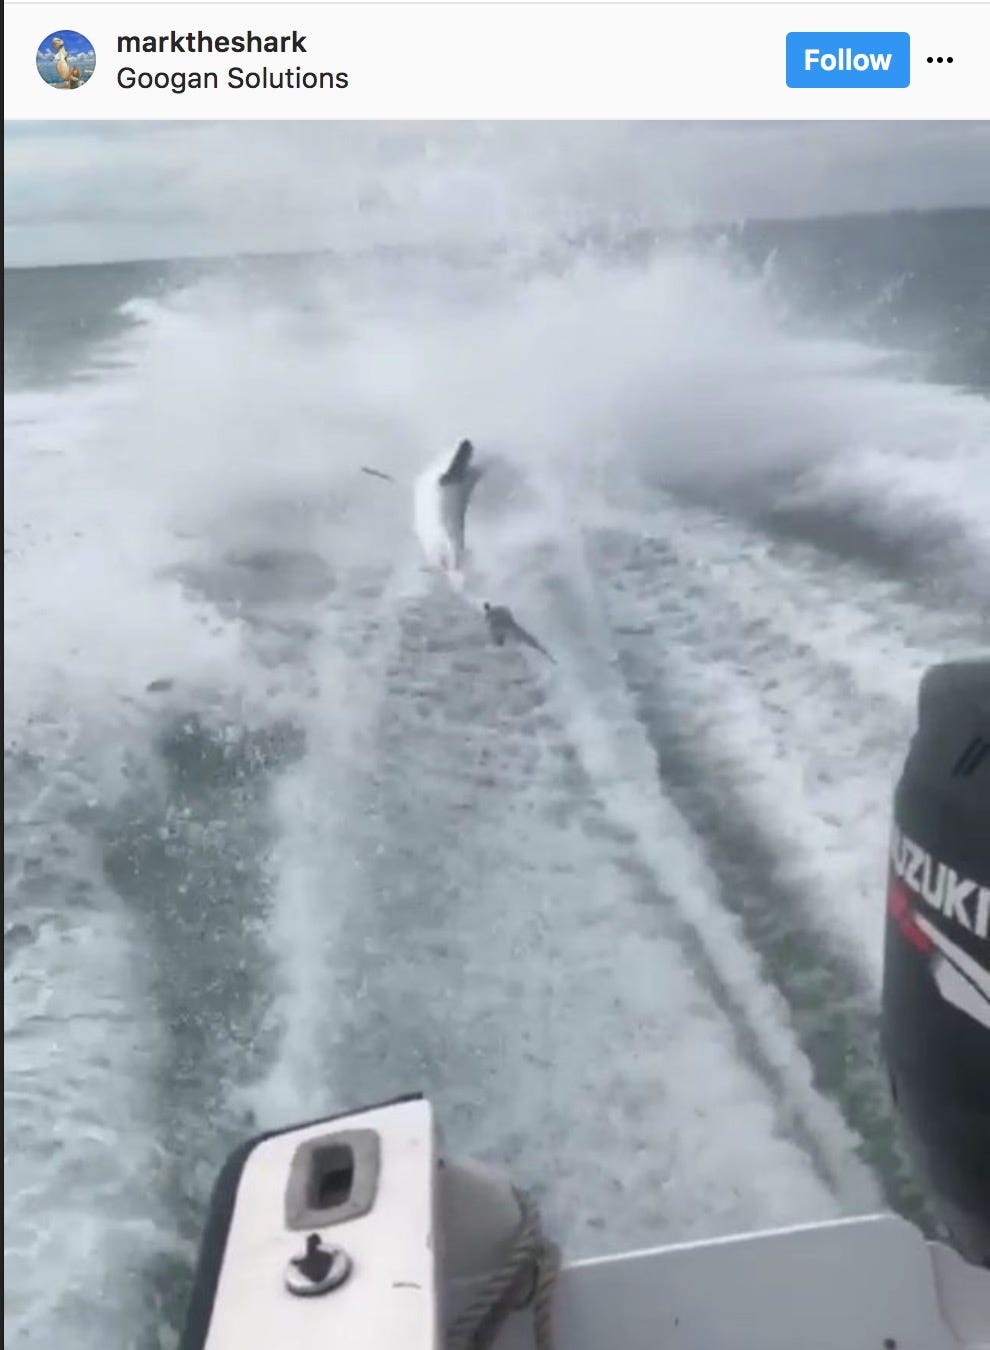 Shark dragged behind high-speed boat in video sparks investigation in Florida